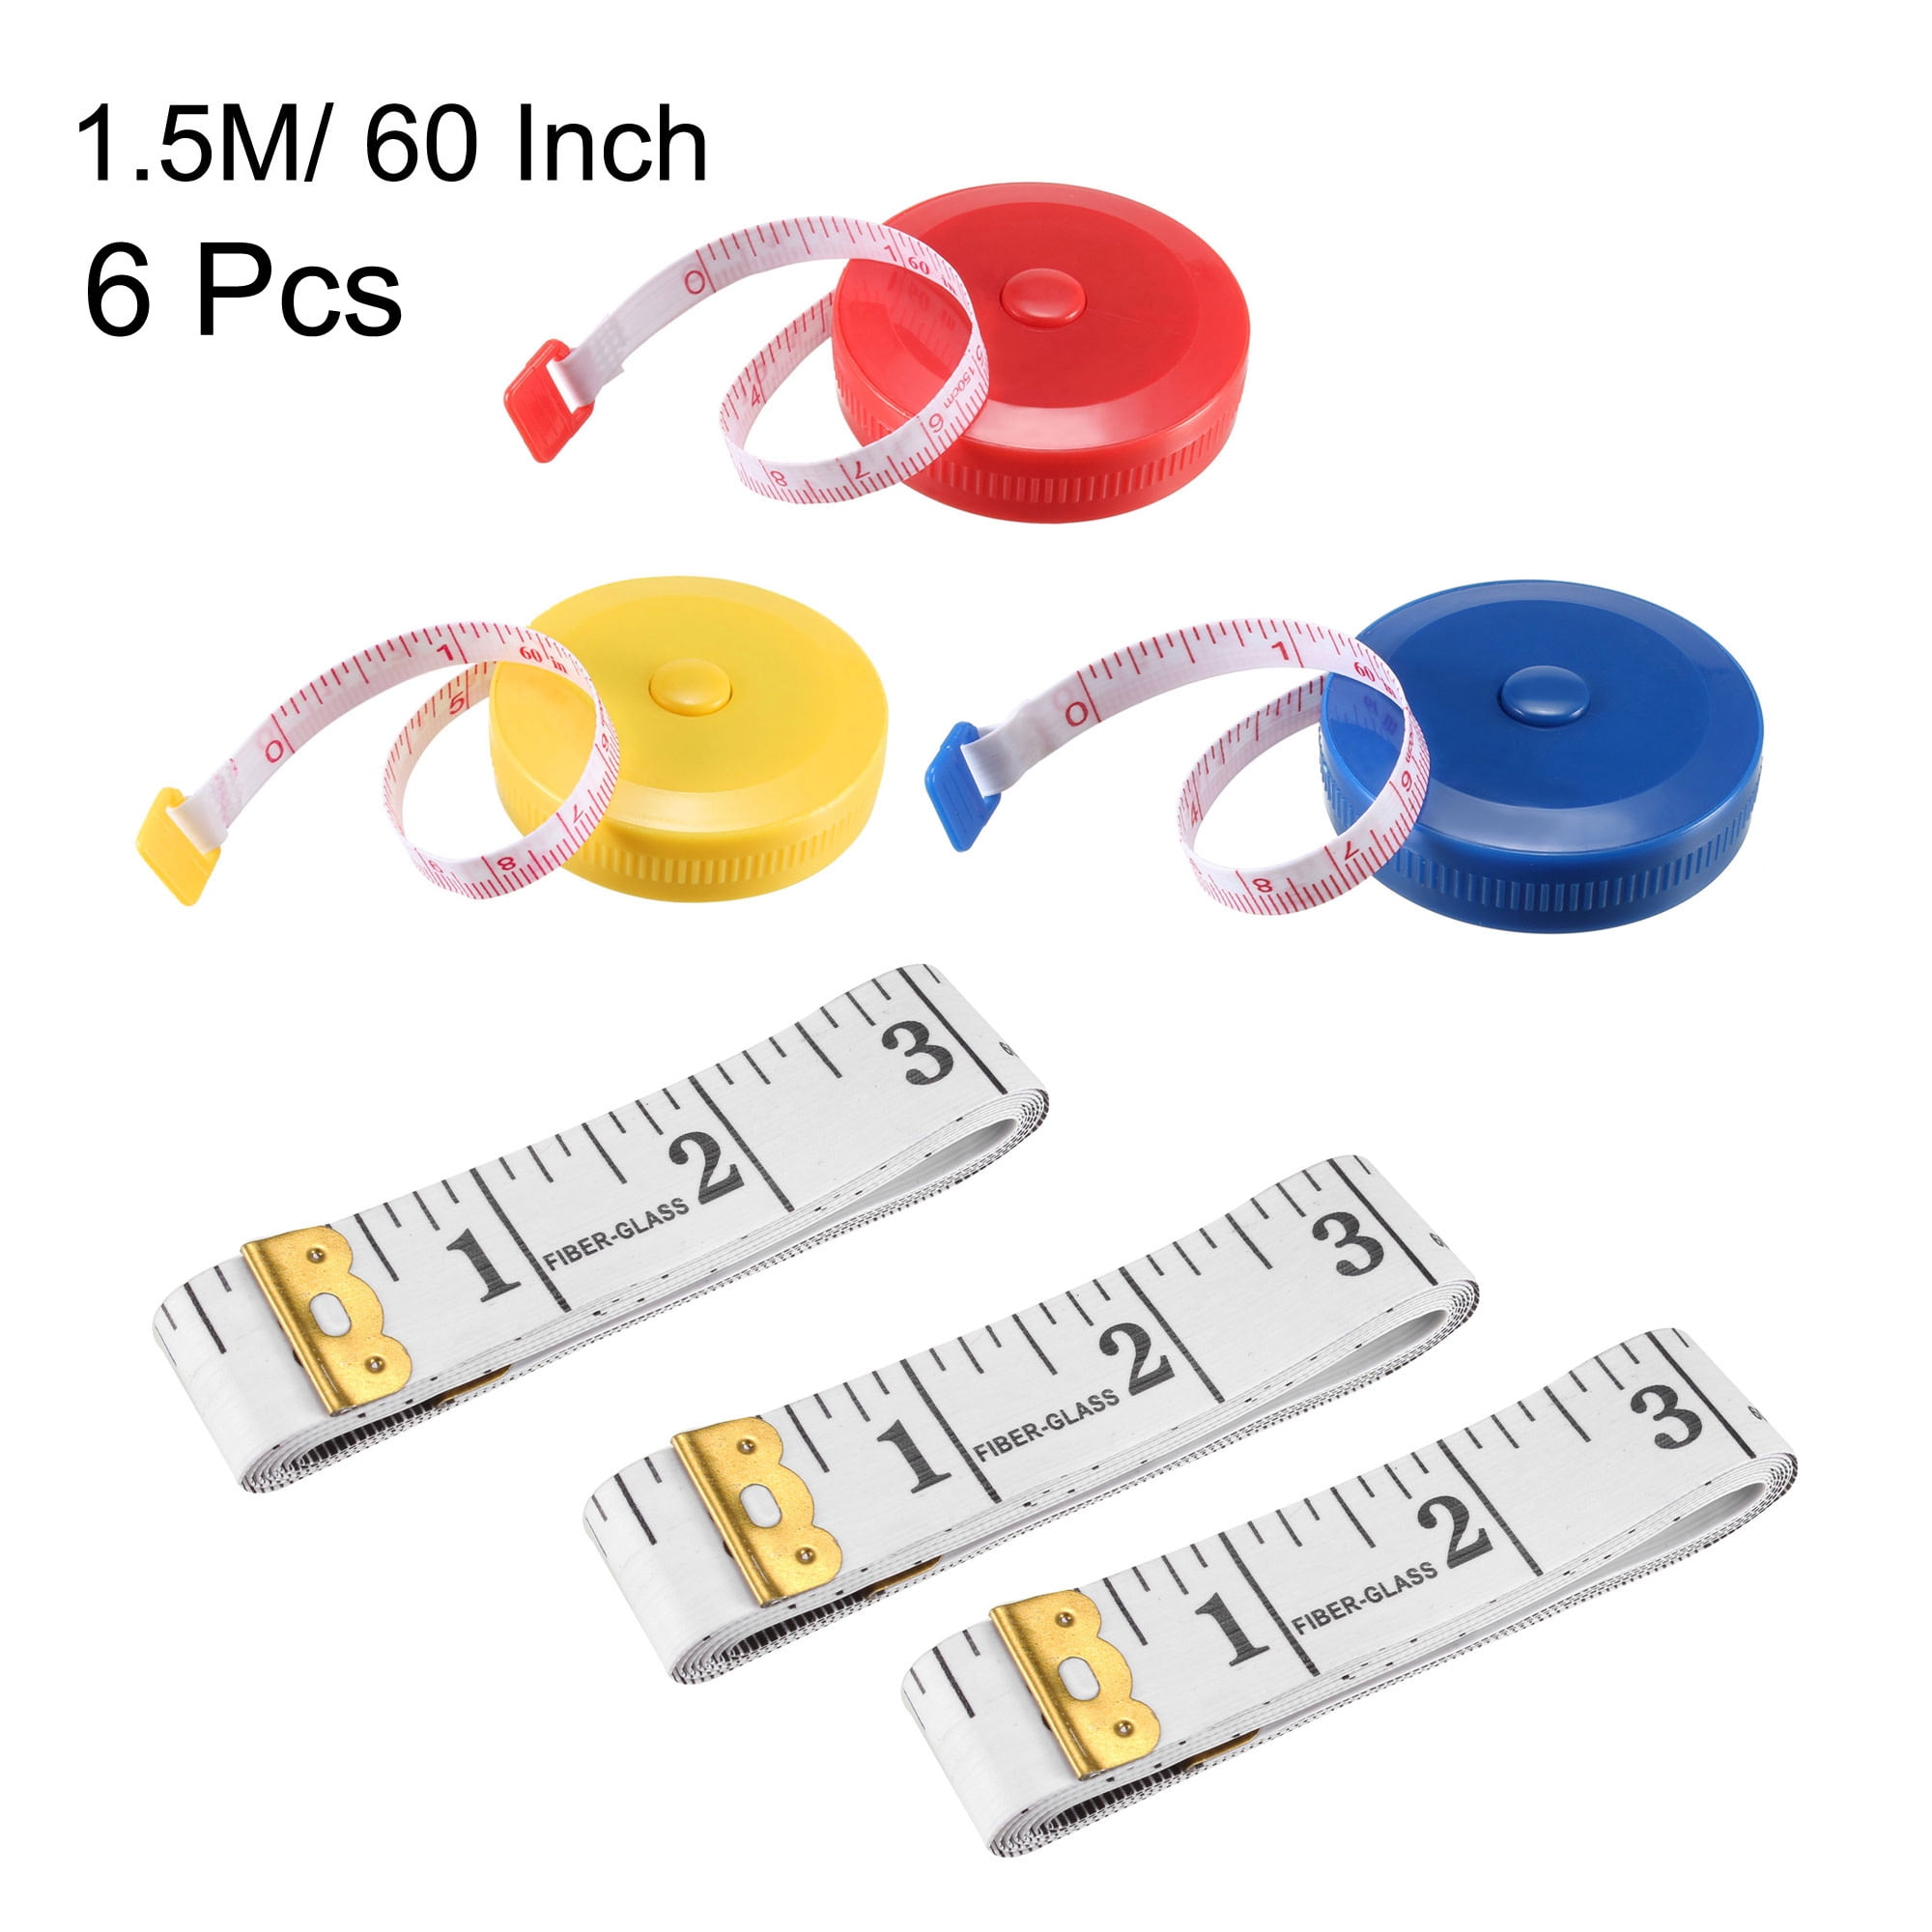 Pcs 60 Tape Measure & Retractable Tape Measure Sewing Accessory Set  (Colors May Vary)